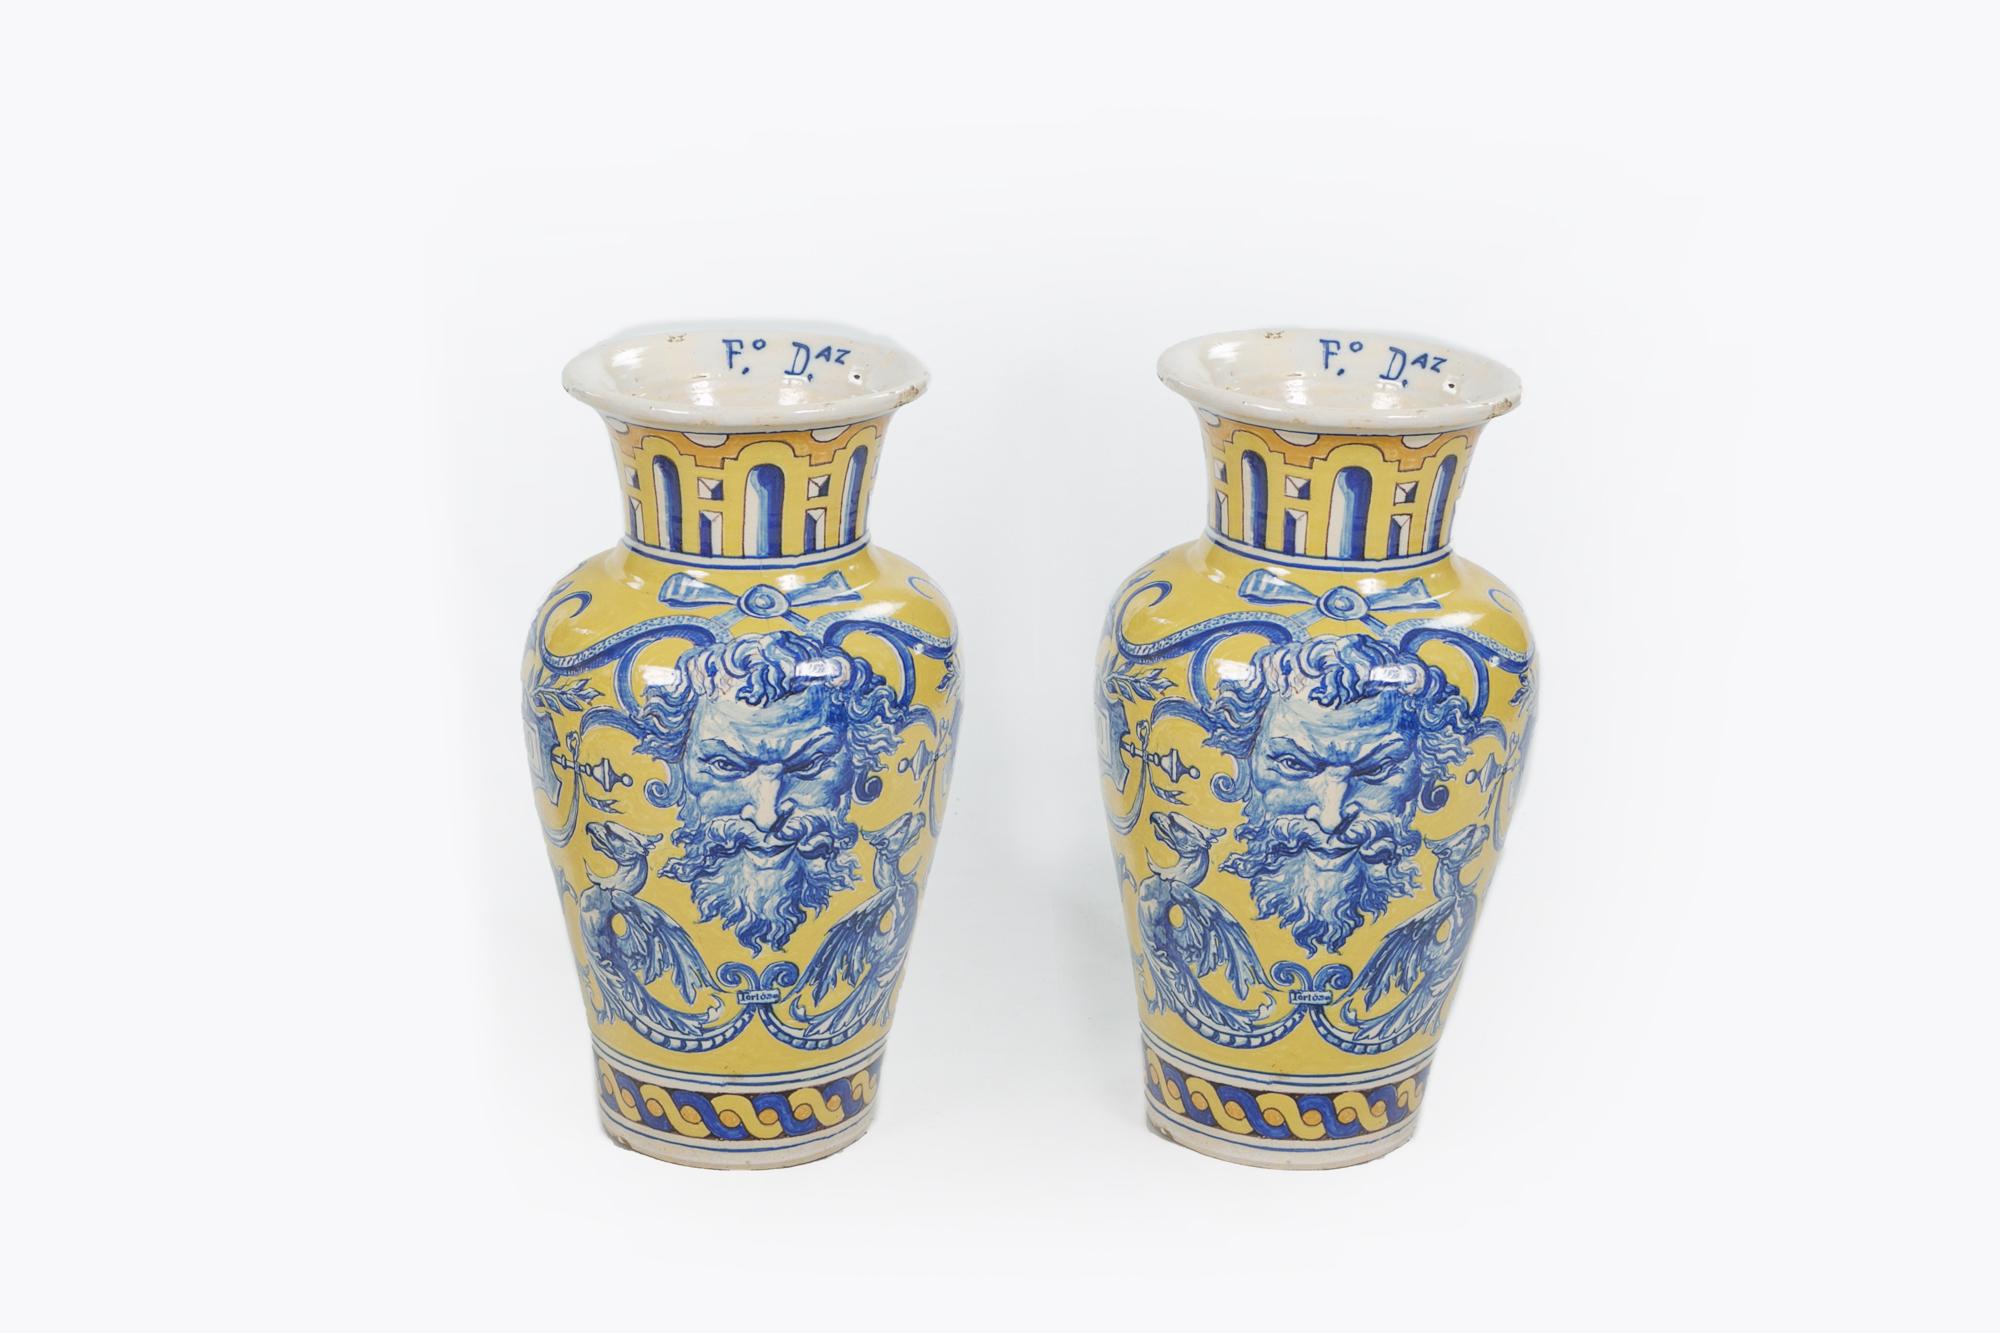 19th-century Spanish pair of large urns with blue mythical masks, dragons, scrolling acanthus leaves, linen swags and with printed text: NO 8 Do, BETTICA and Tortosa all against a yellow background, Talavera de la Reina Pottery, stamped